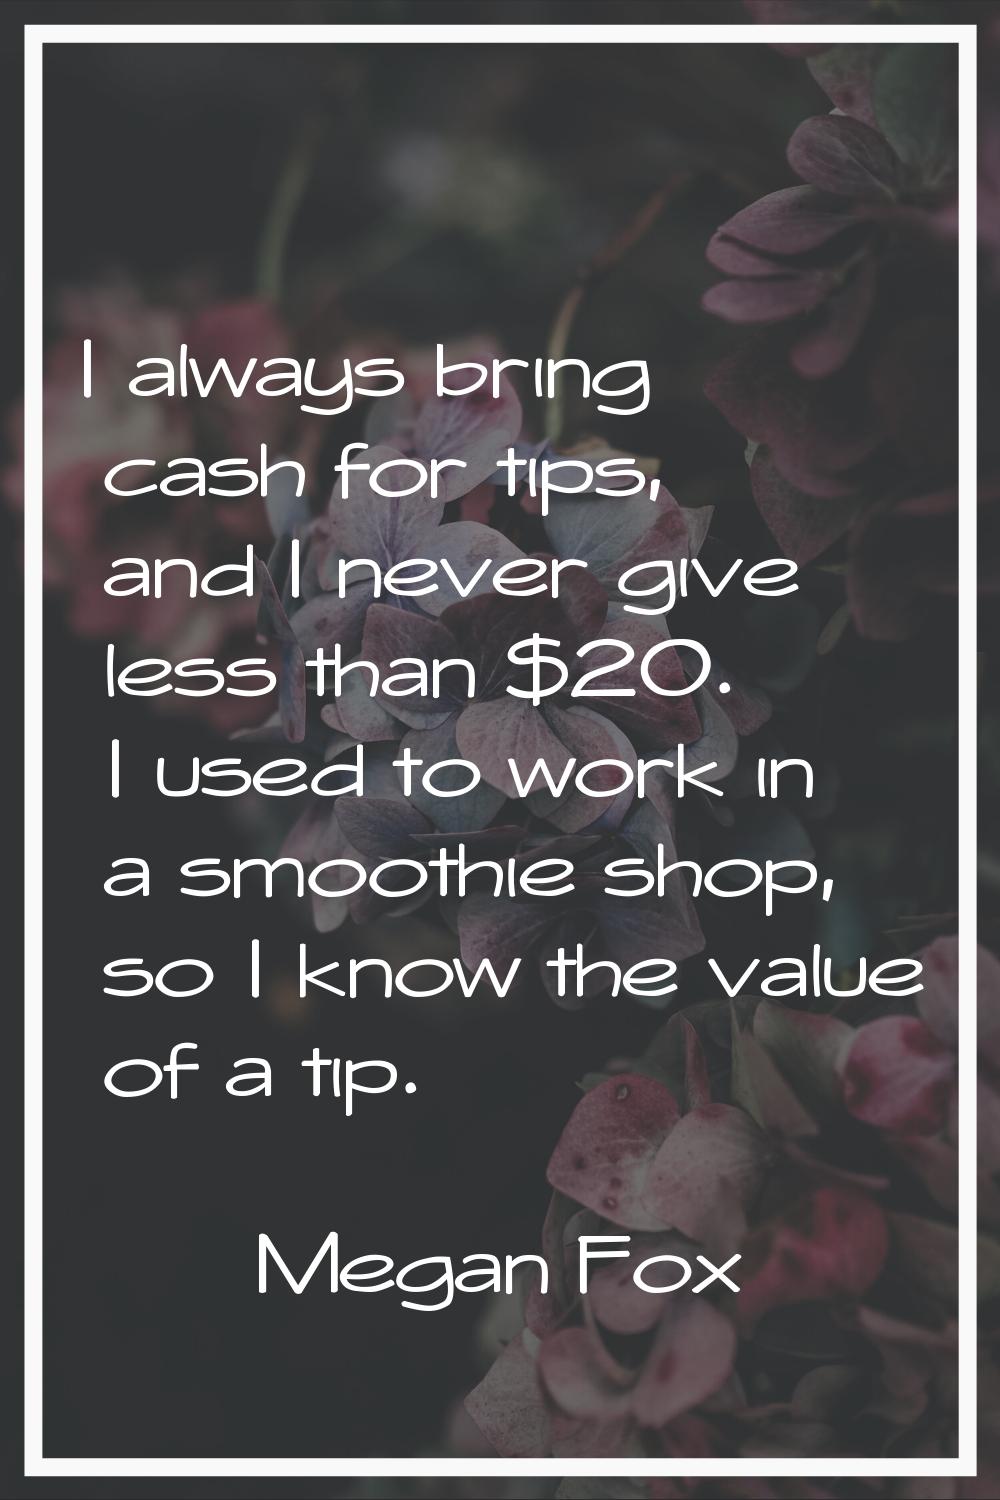 I always bring cash for tips, and I never give less than $20. I used to work in a smoothie shop, so